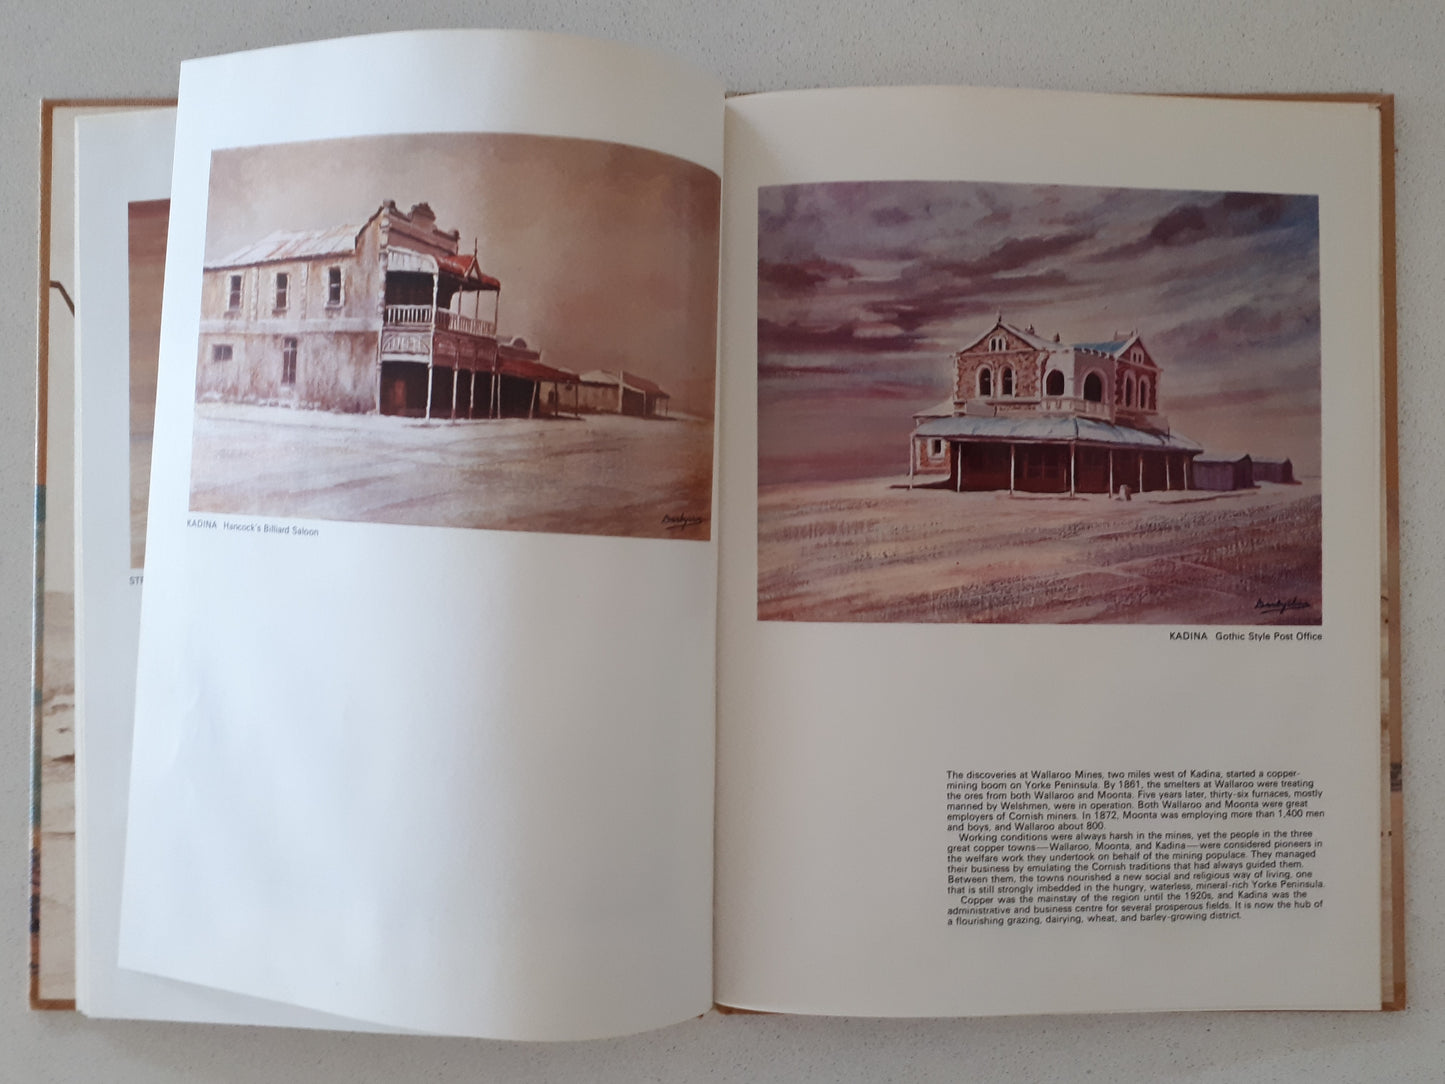 Old Mining Towns of South Australia by John Darbyshire & C. E. Sayers